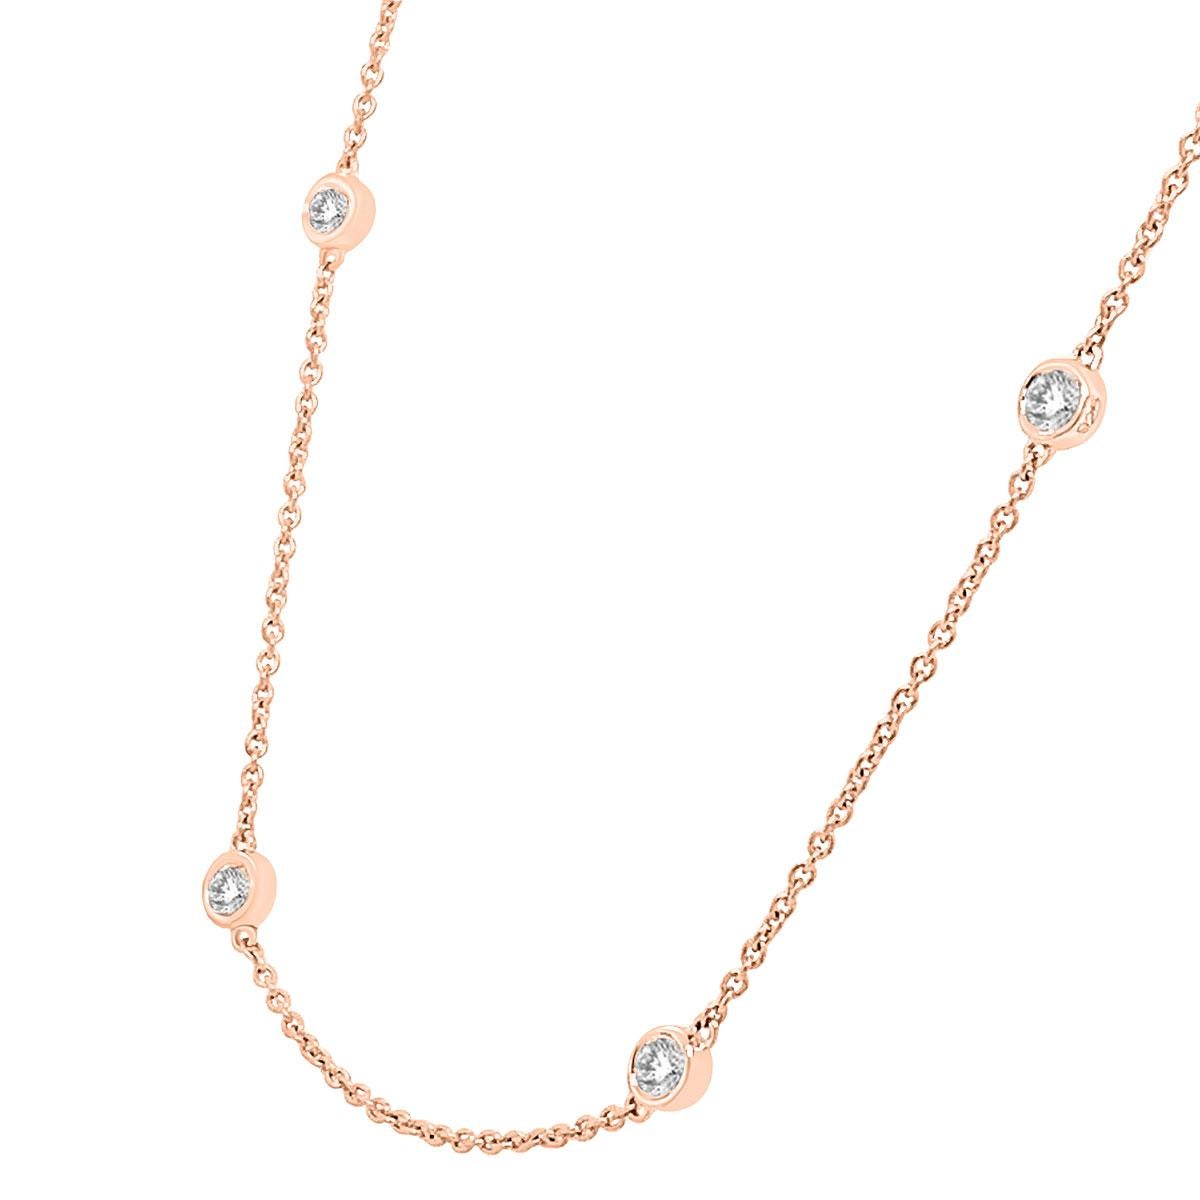 This classic necklace features six (6) perfectly matched brilliant round diamonds evenly spread. Experience the difference in person!

Product details: 

Center Gemstone Type: NATURAL DIAMOND
Center Gemstone Shape: ROUND
Metal: 18K Rose Gold
Metal